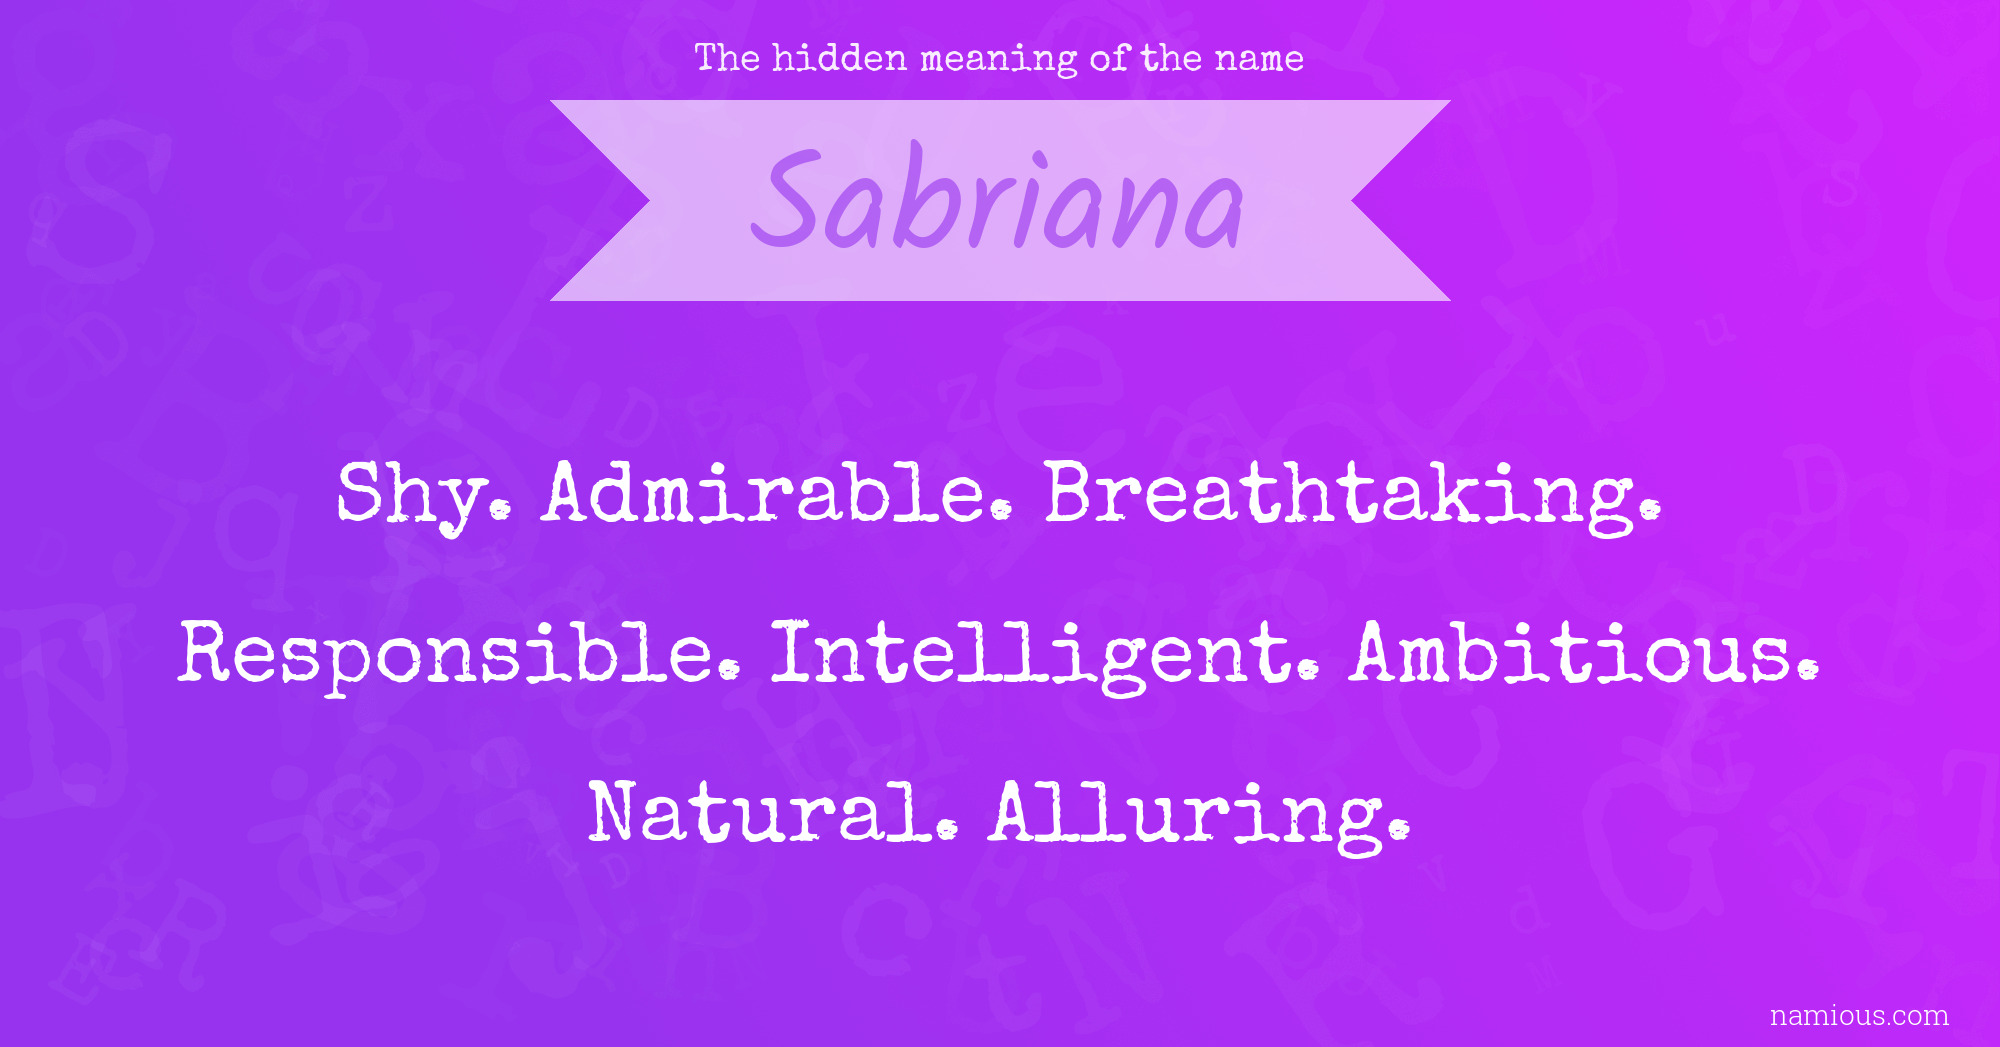 The hidden meaning of the name Sabriana